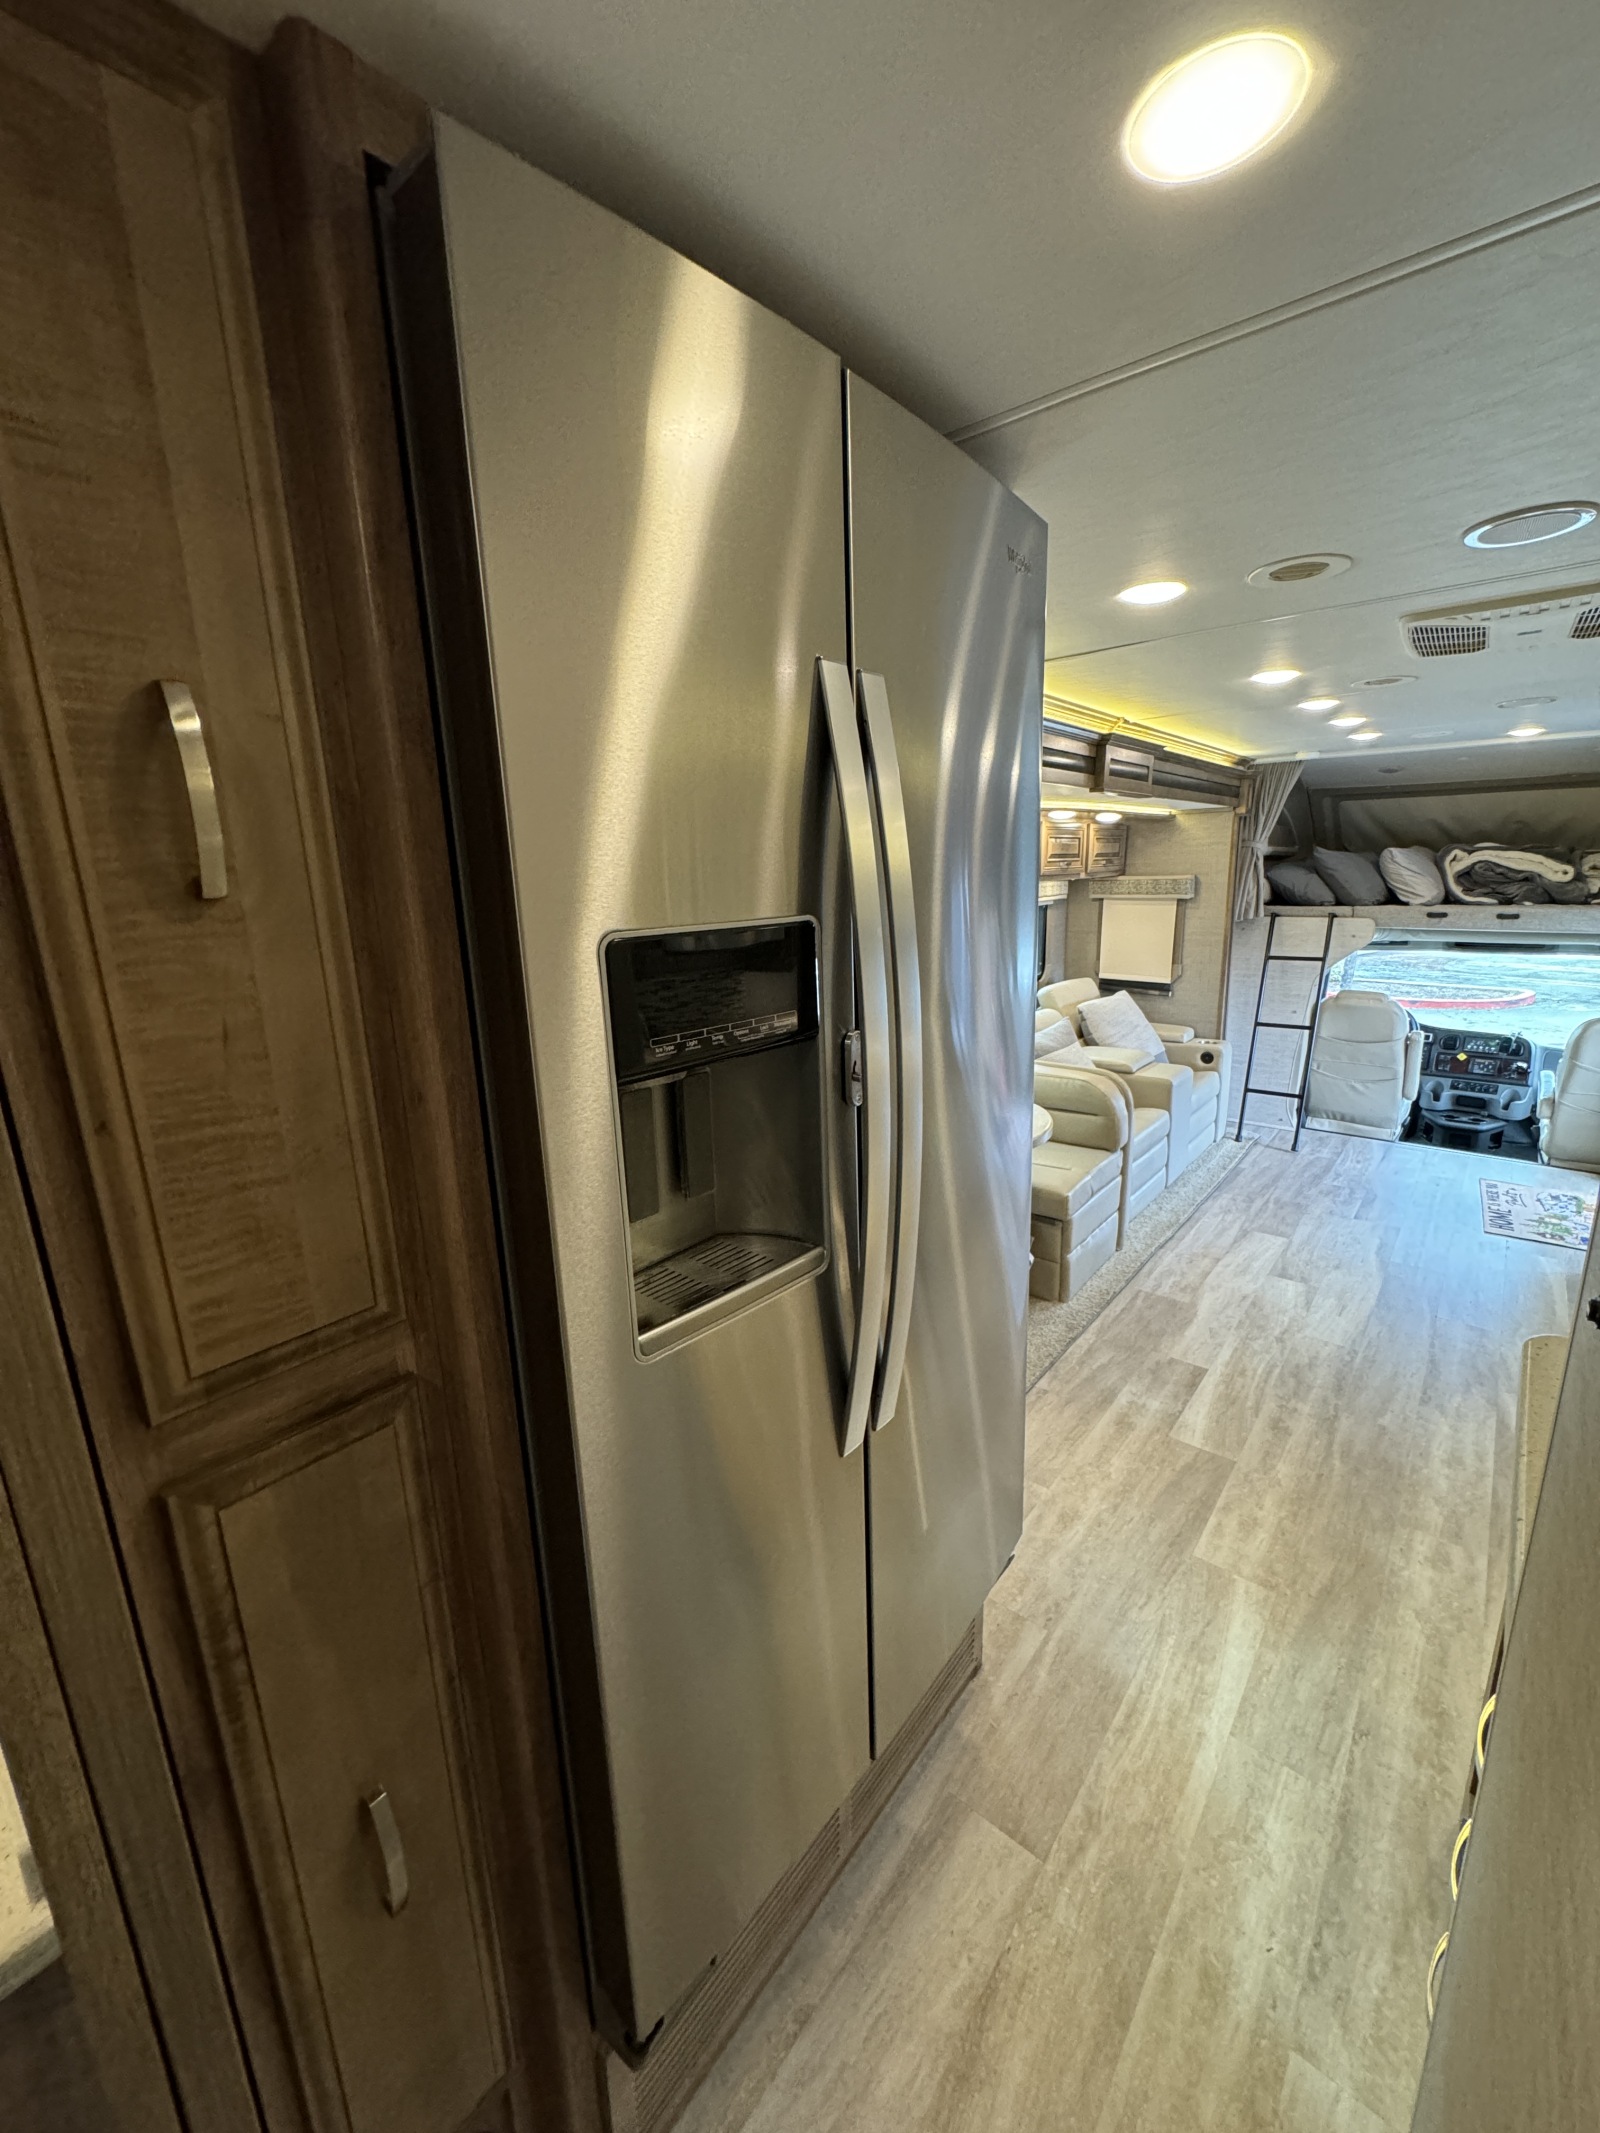 For Sale: 2021 Jayco Seneca 37TS Super Class C - Super Clean and Ready to Go... - photo8